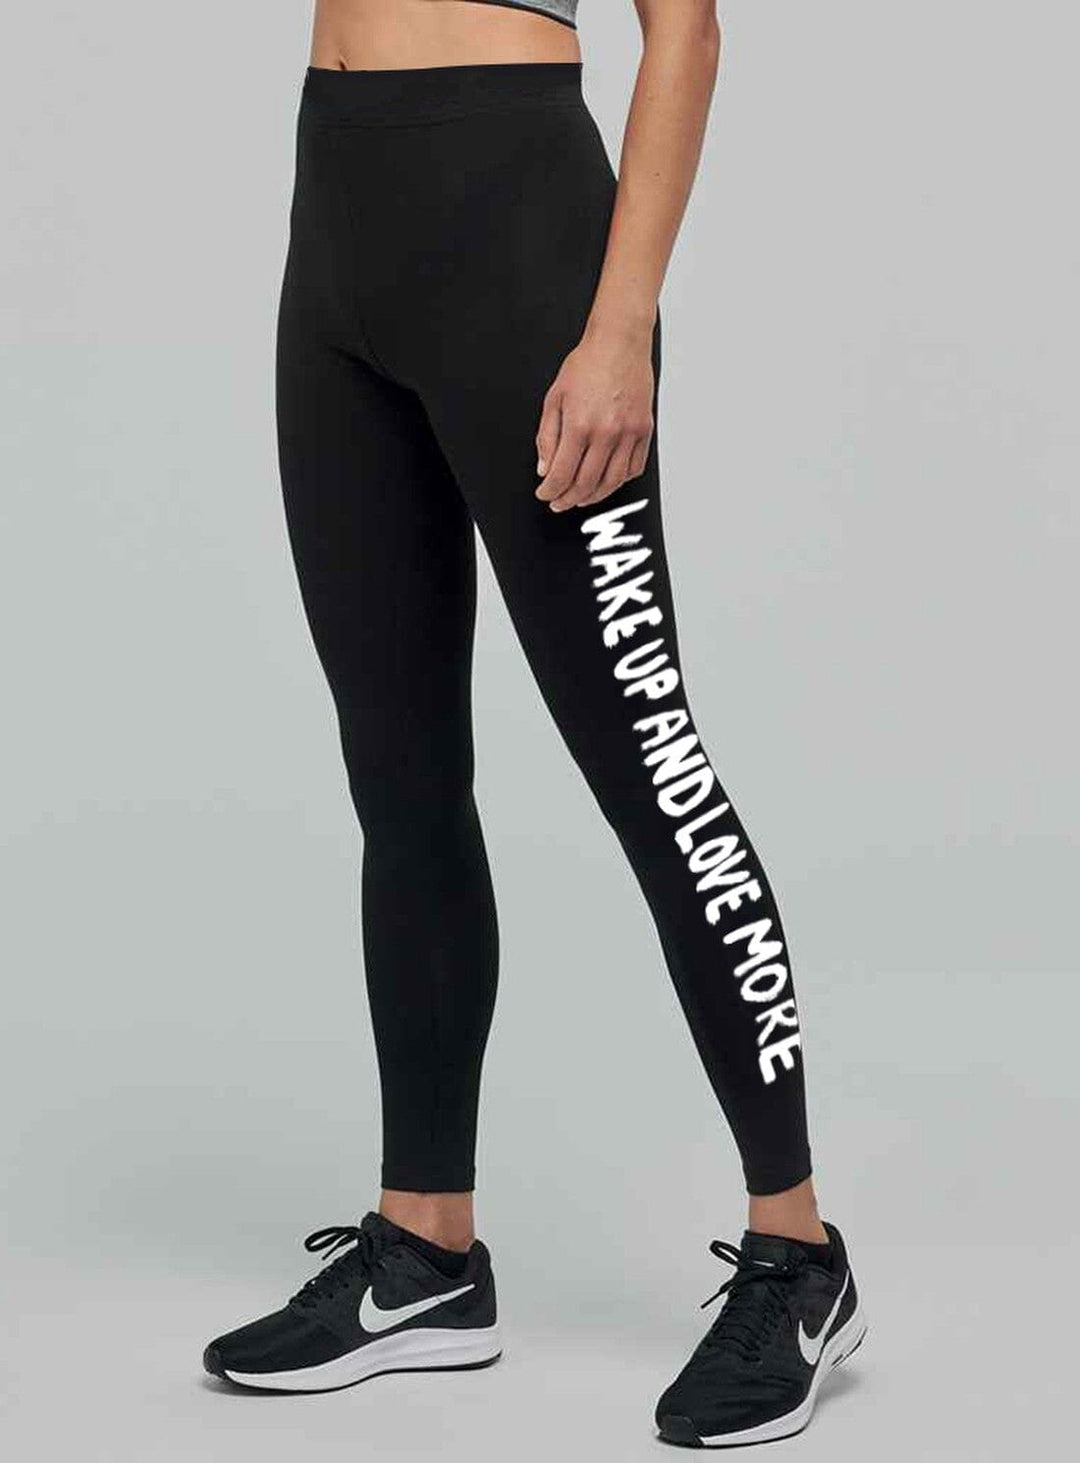 Wake Up and Love More Leggings Trousers YBDFinds 